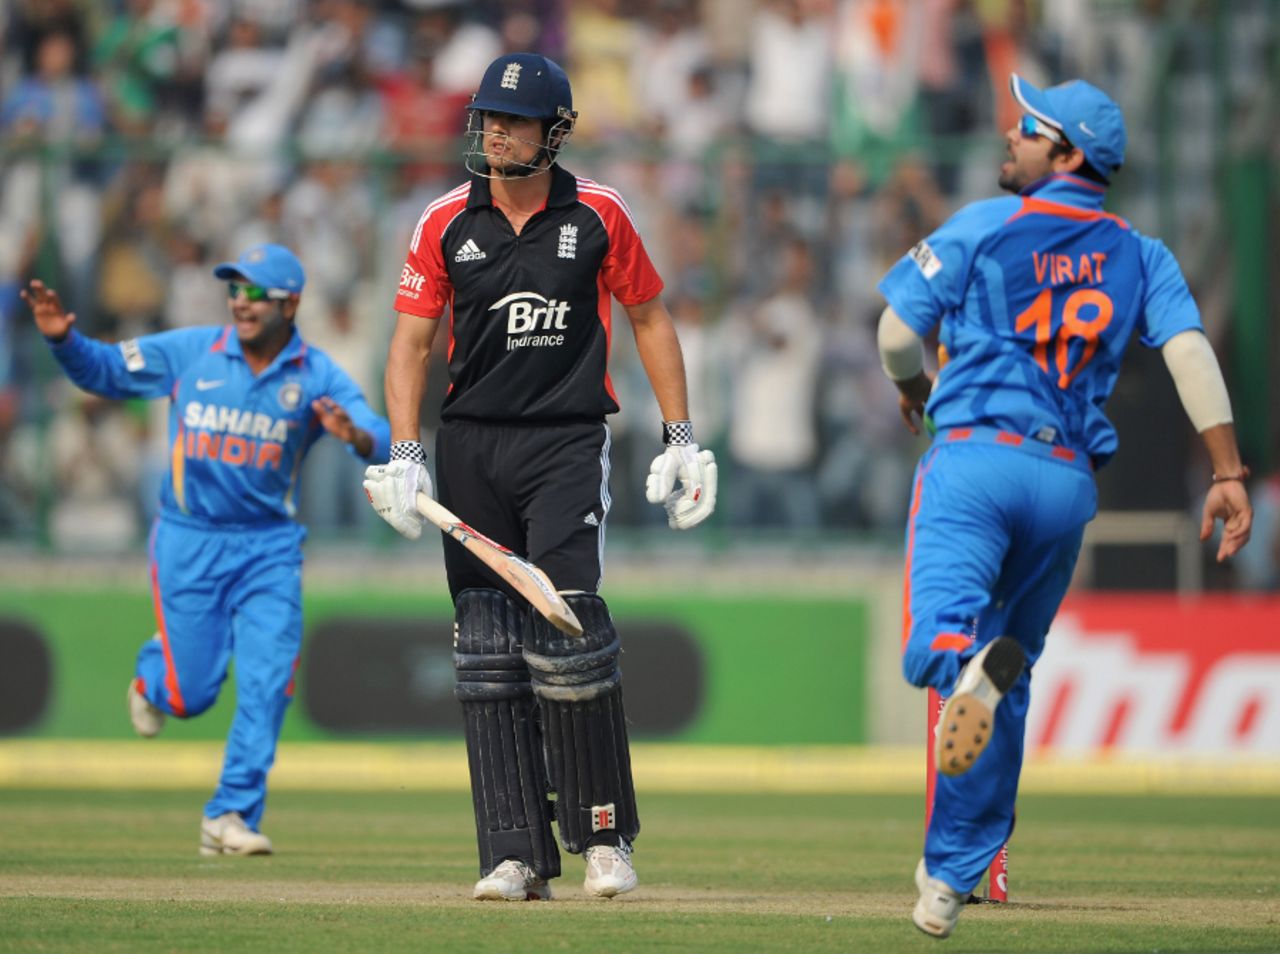 Alastair Cook fell in the first over of England's innings, India v England, 2nd ODI, Delhi, October 17 2011